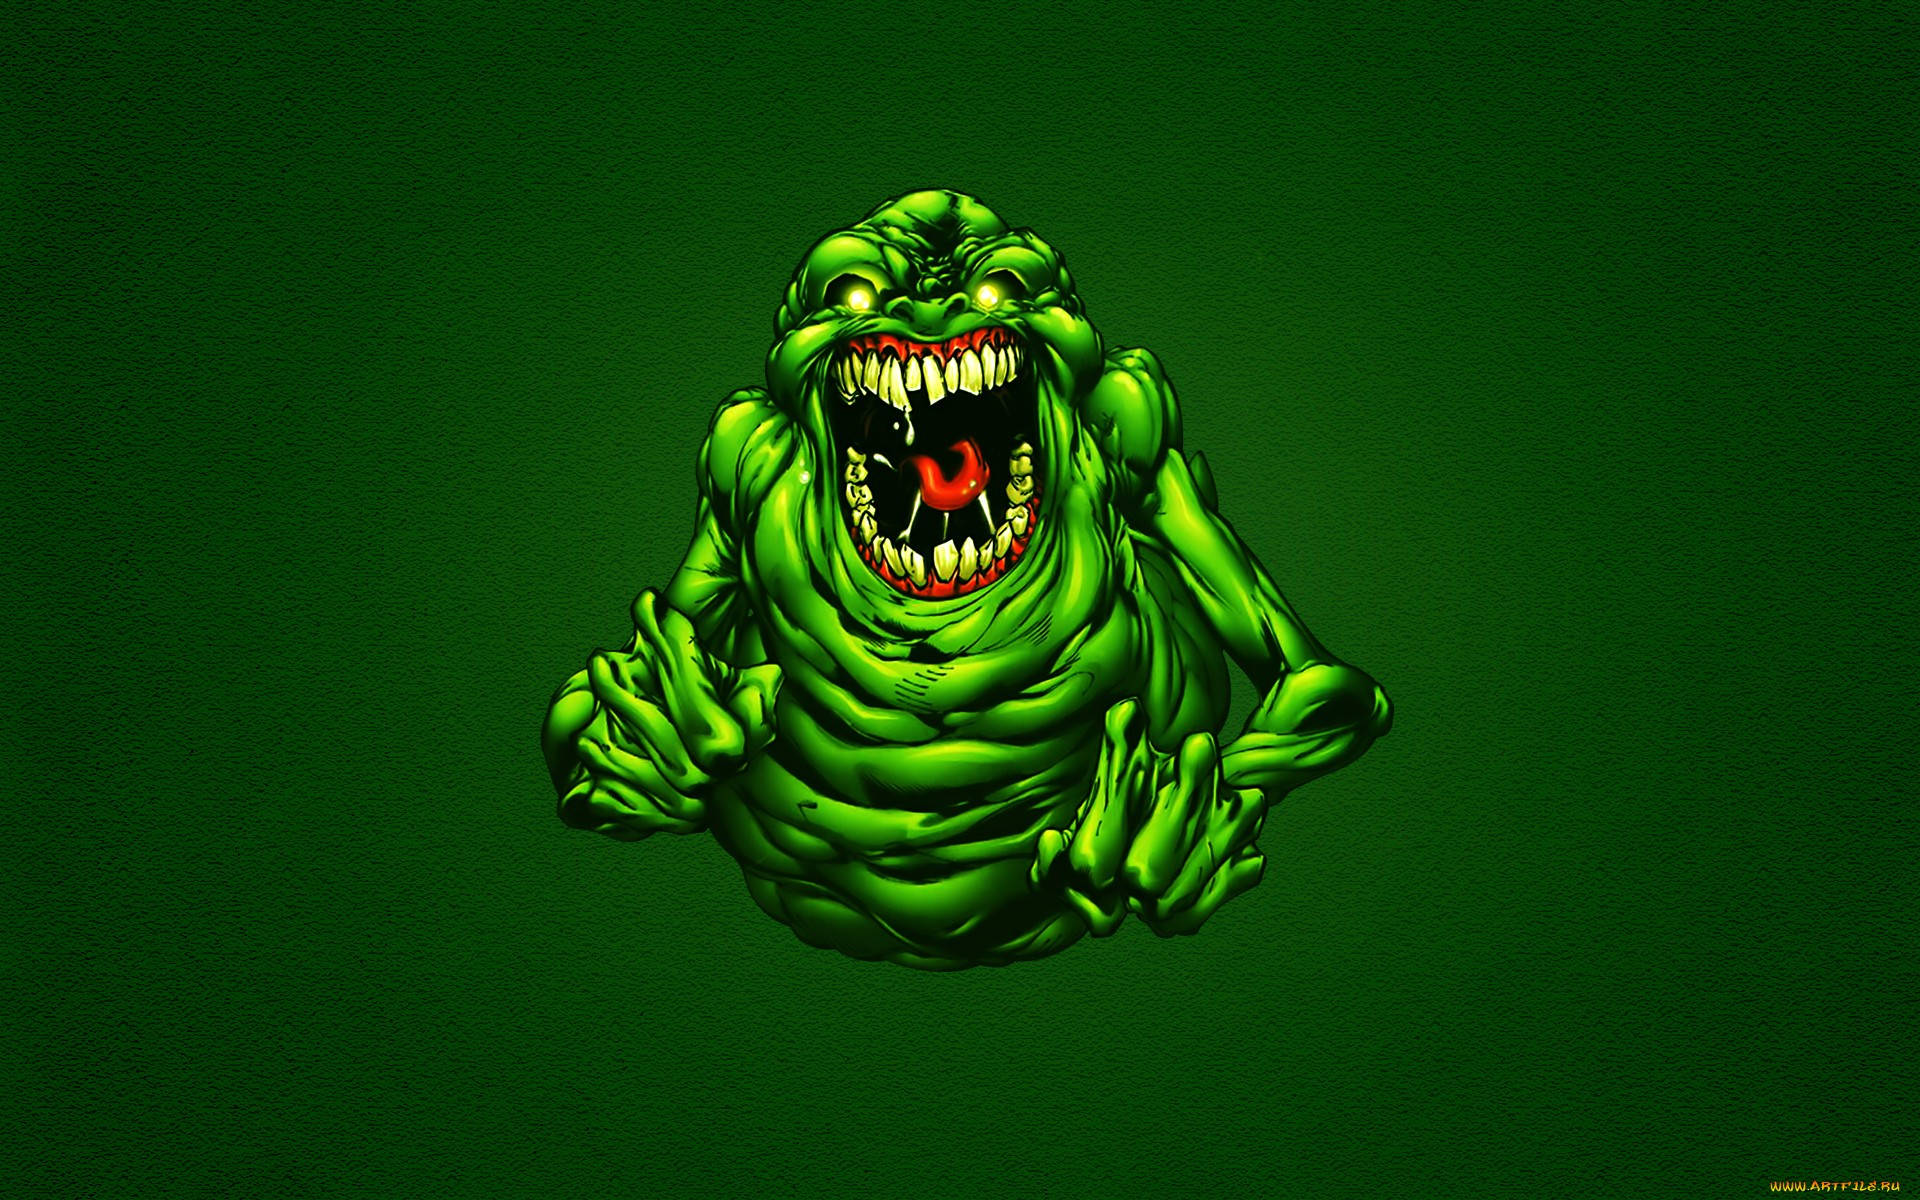 Slimer, the iconic green ghost from Ghostbusters, wreaks havoc! Wallpaper